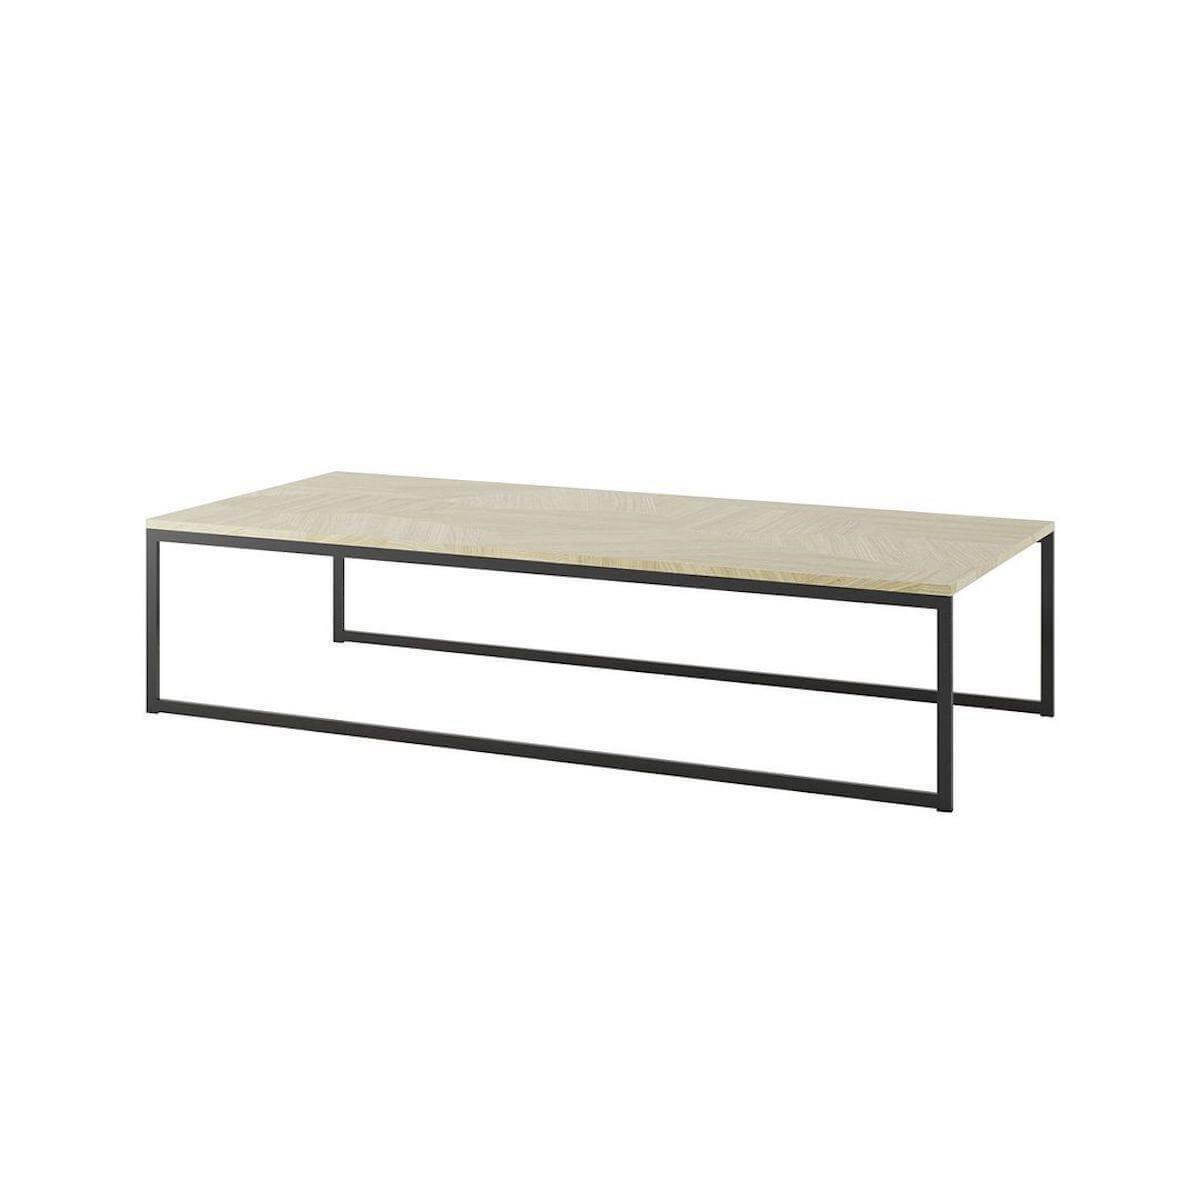 Manhattan Comfort Celine 53.14 Inch Coffee Table with Steel Legs in Mosaic Wood 255351 Right Angle #color_mosaic wood